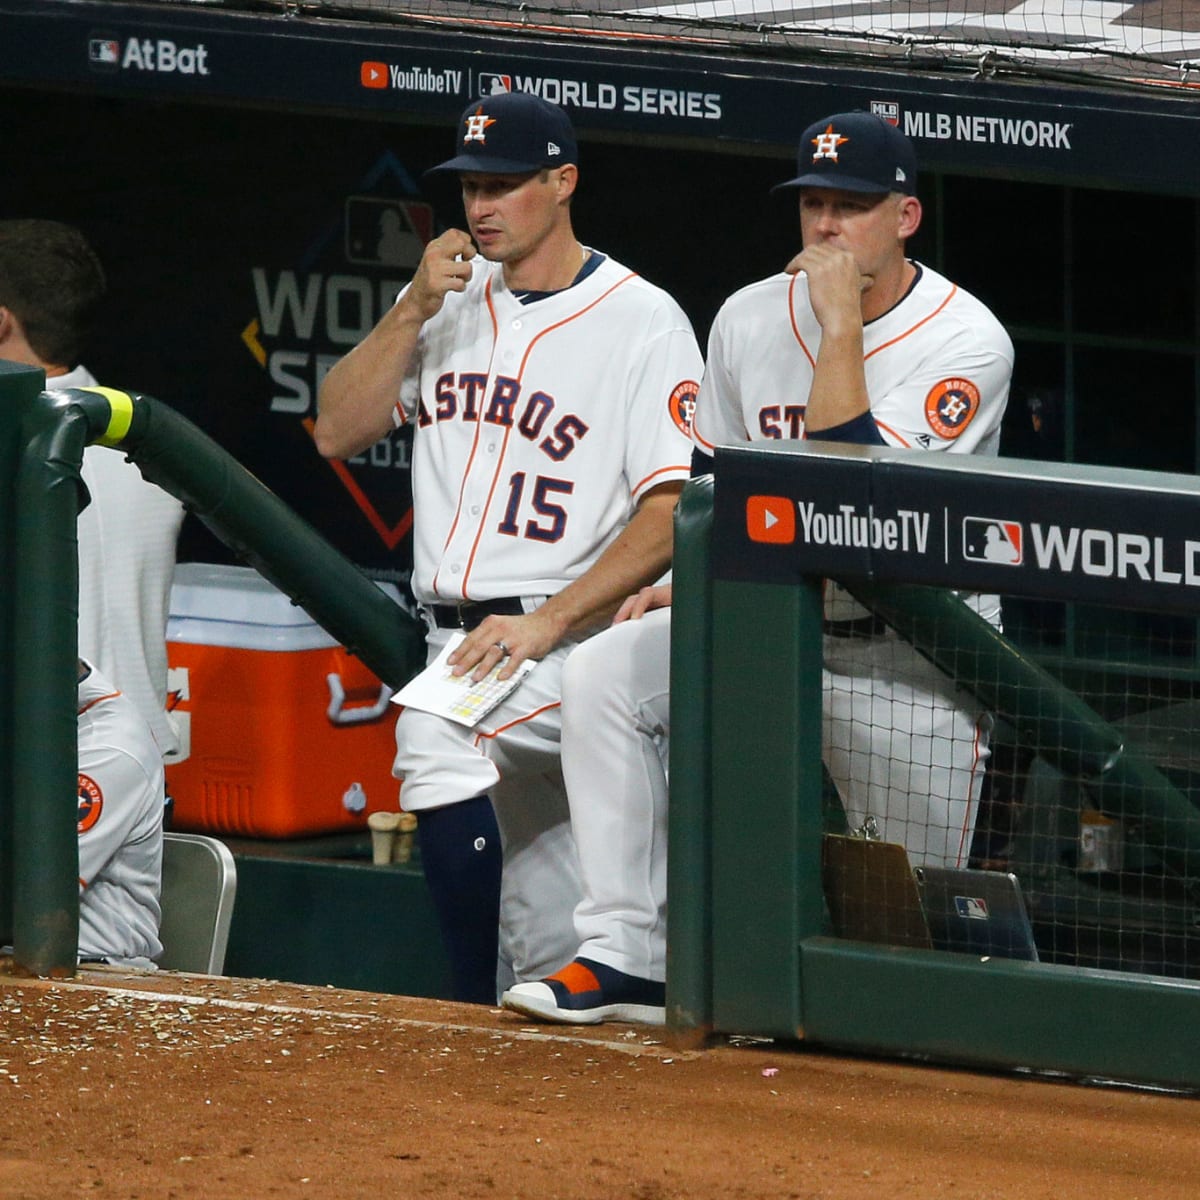 Are The Astros Being Punished More Harshly Because They're Not The Yankees?  – Houston Public Media